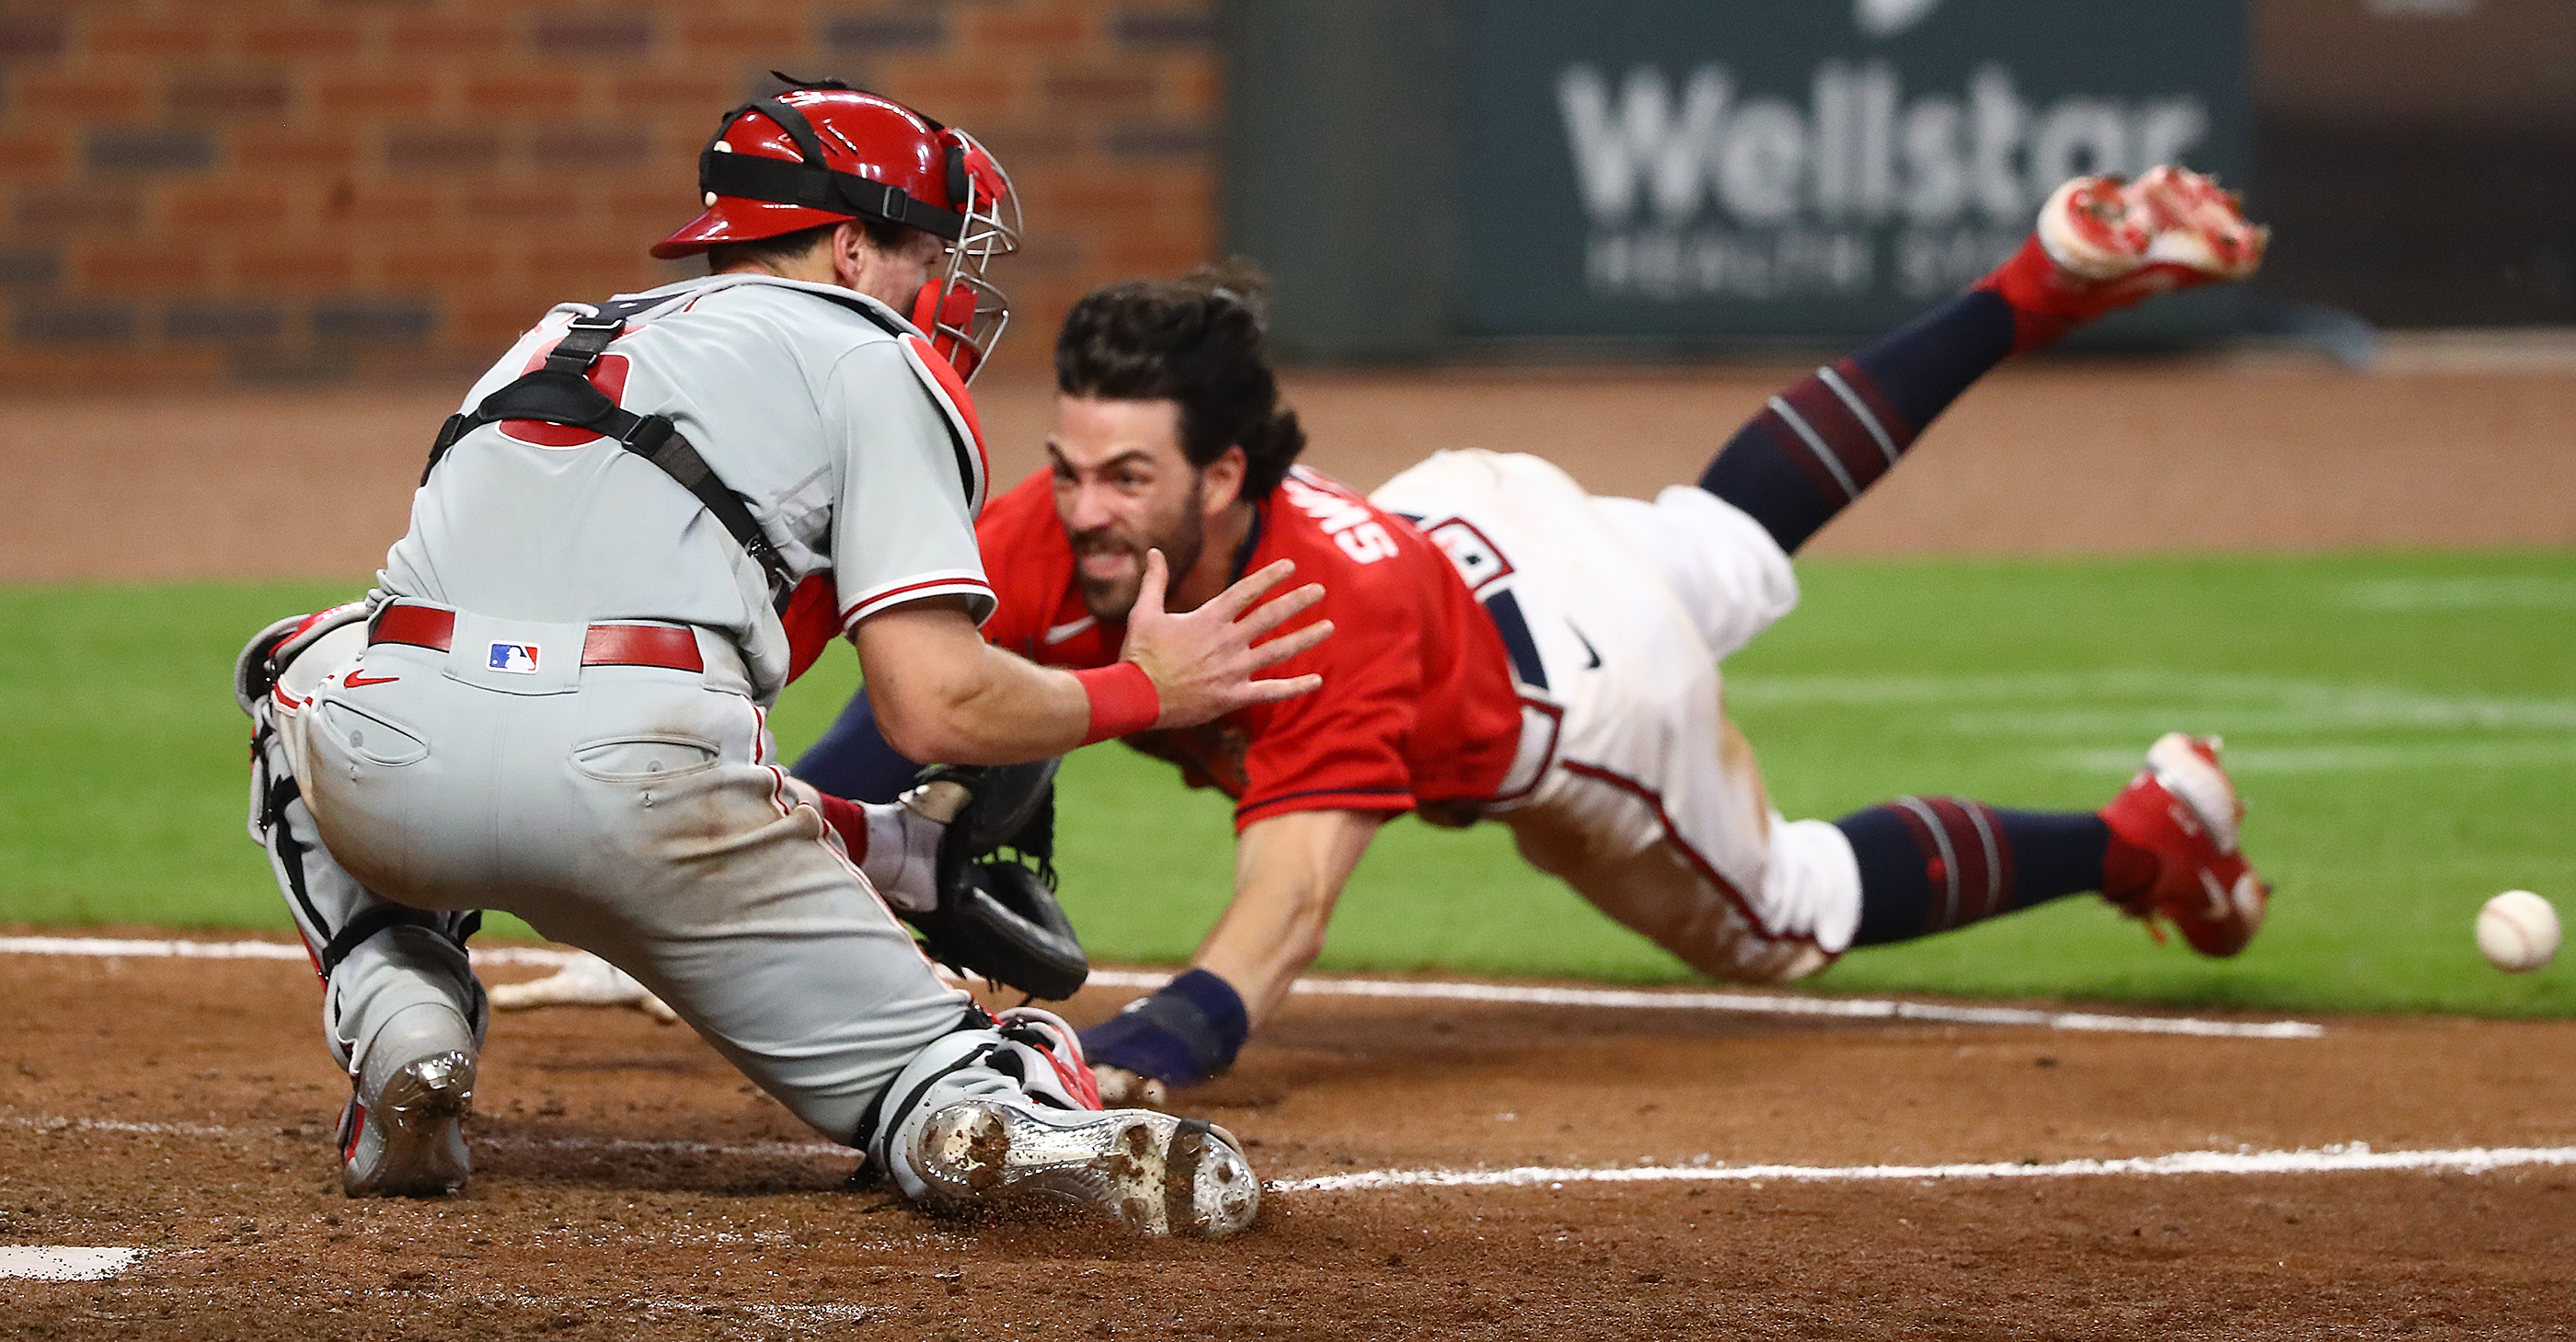 Andrew Knapp's tag of Dansby Swanson broke plate-blocking rules, Braves  manager Brian Snitker says